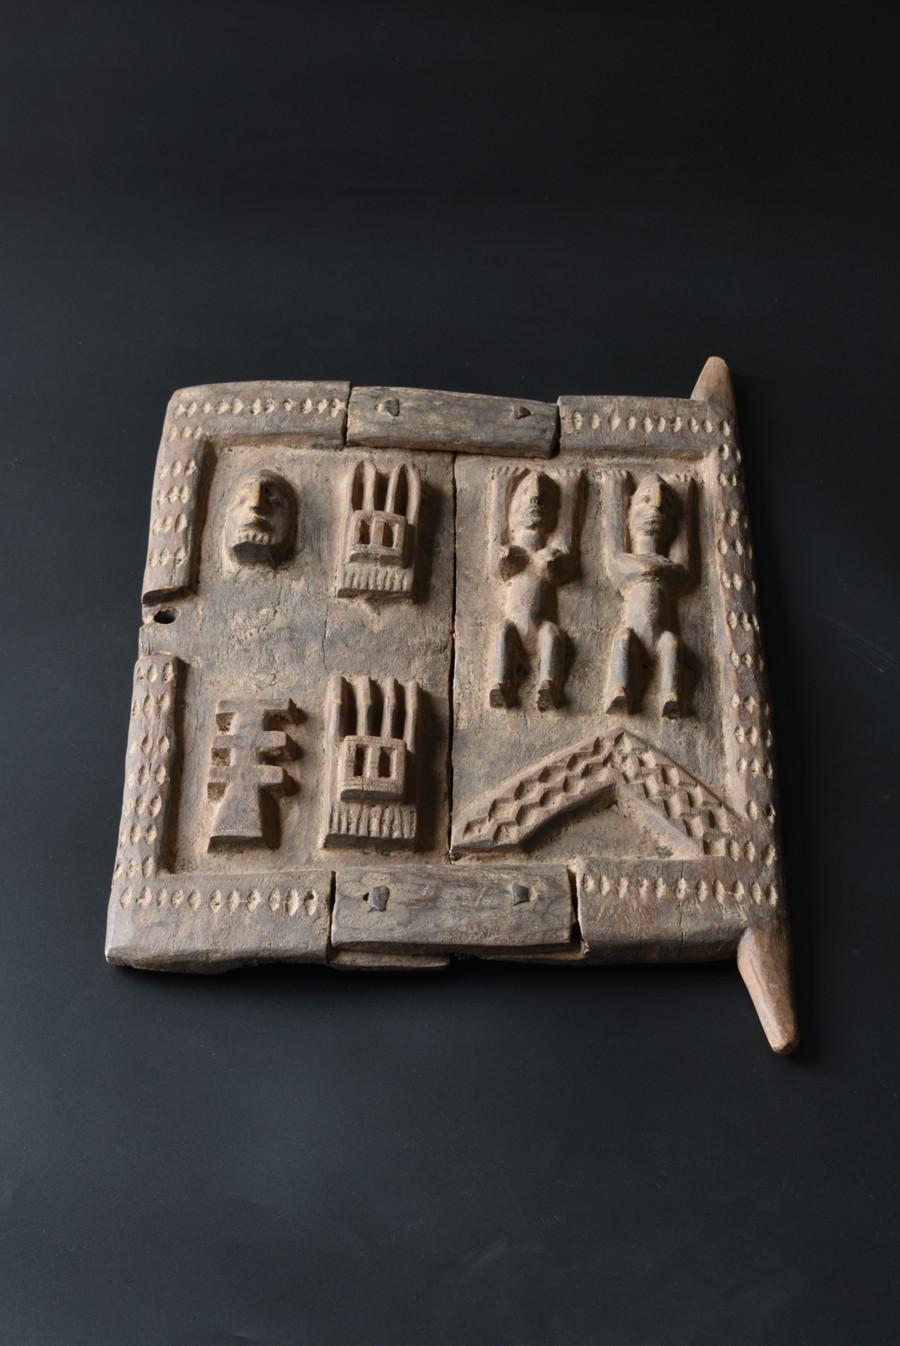 African Dogon door/20th century/wall hanging object/tribal sculpture 2